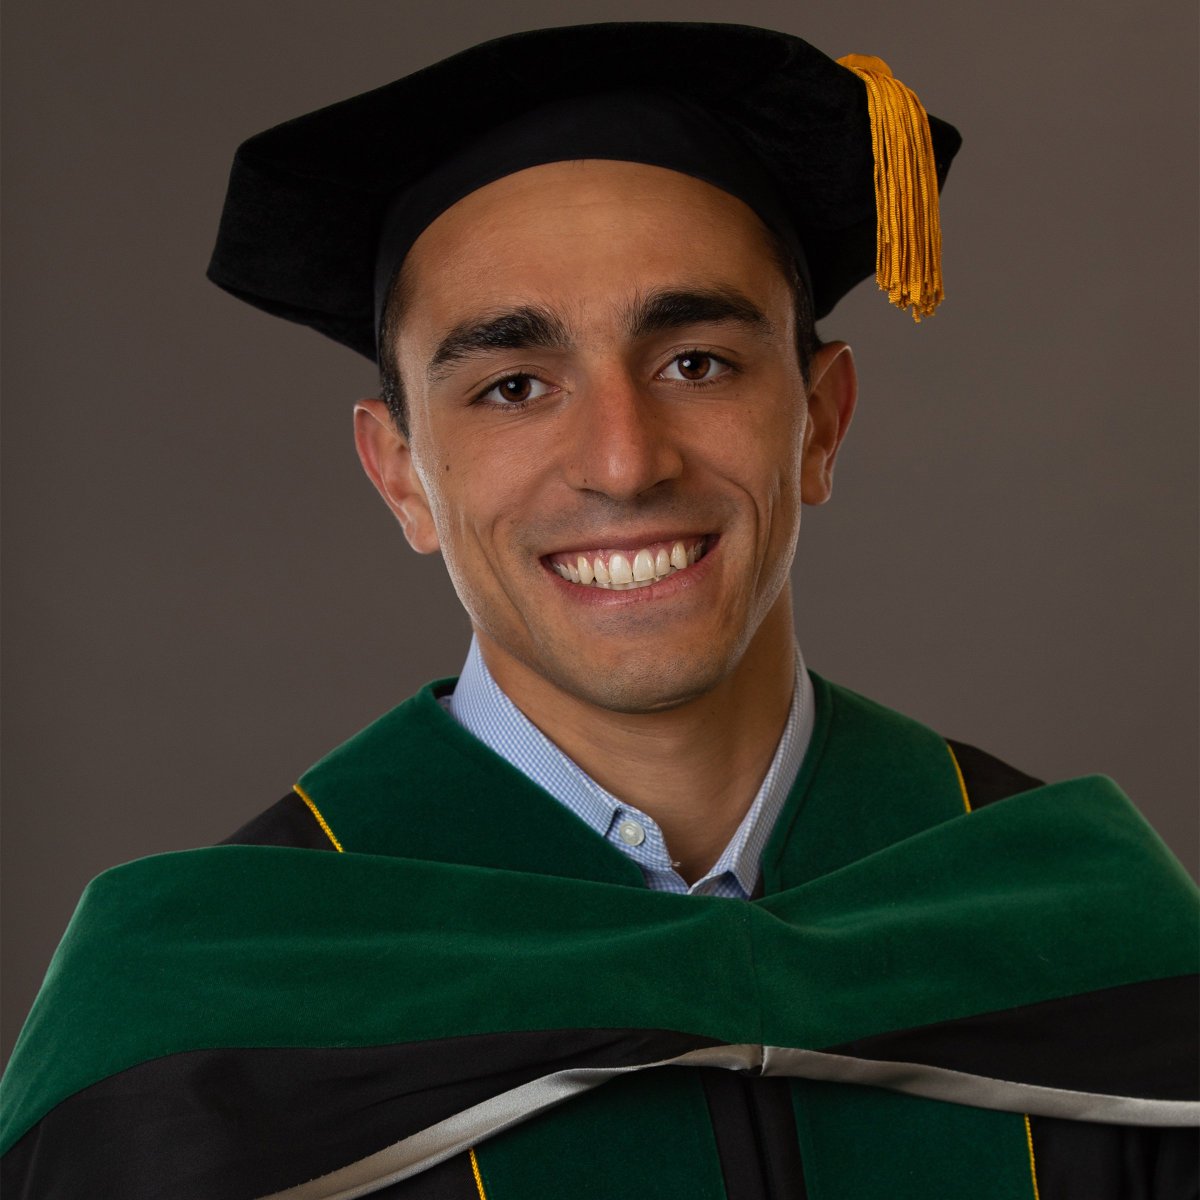 Congratulations to Dr. Joseph Saad, alumnus of ICOM's inaugural Class of 2022, on being named Chief Resident 2024-2025 🎉 Dr. Saad will soon be entering the third and final year of his Emergency Medicine Residency at St. Louis University School of Medicine.